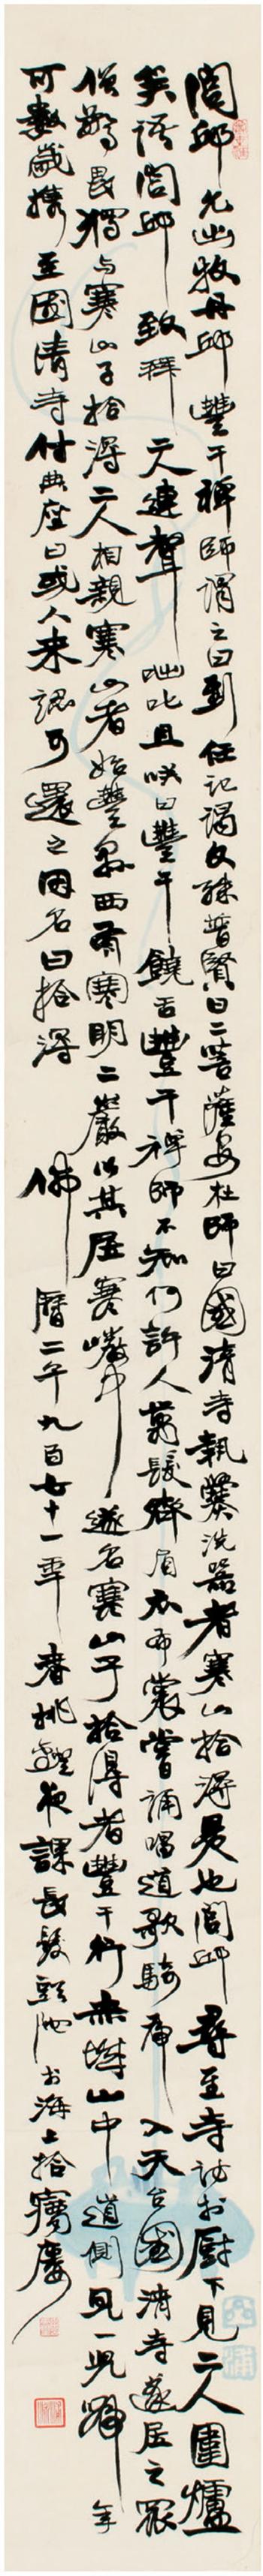 Calligraphy in Running Script by 
																	 Pu Yong